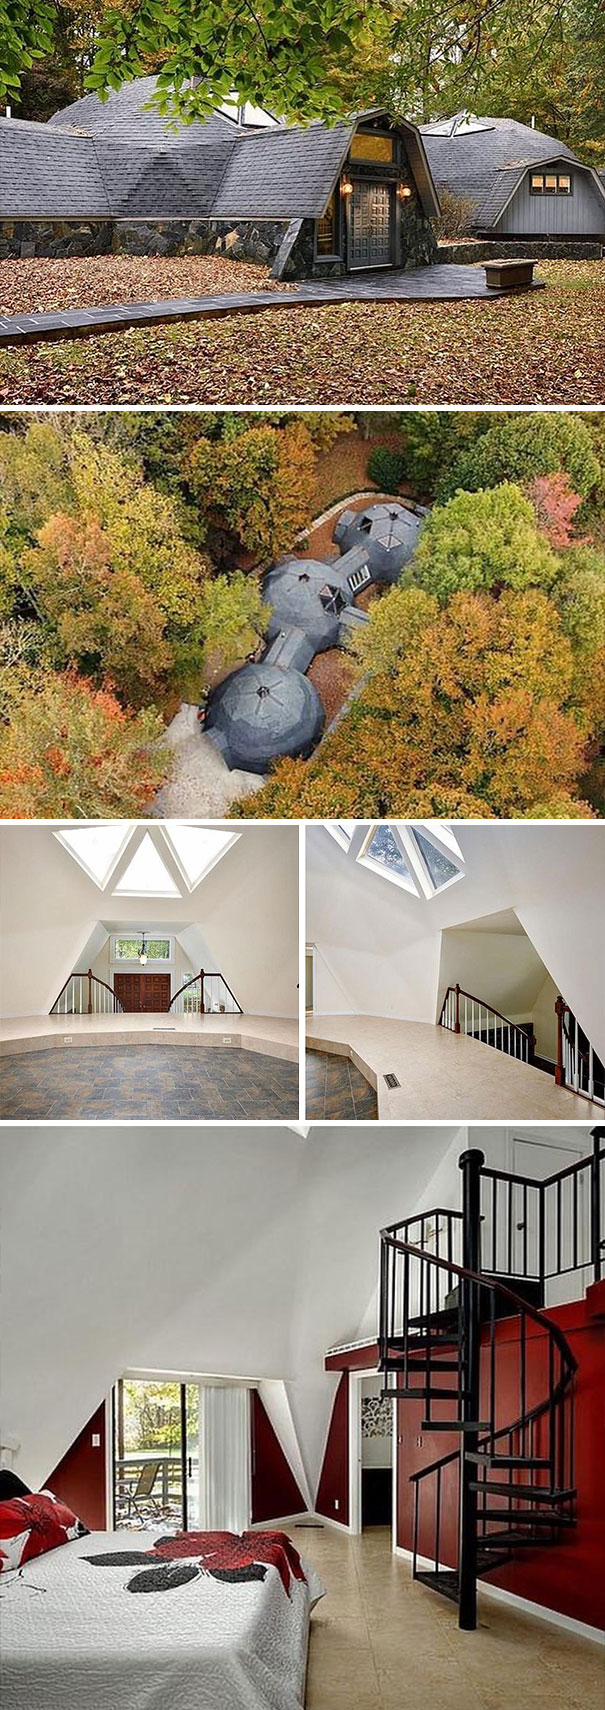 Would You Live In The Triple Dome Home??? Advance, Nc. $449,000